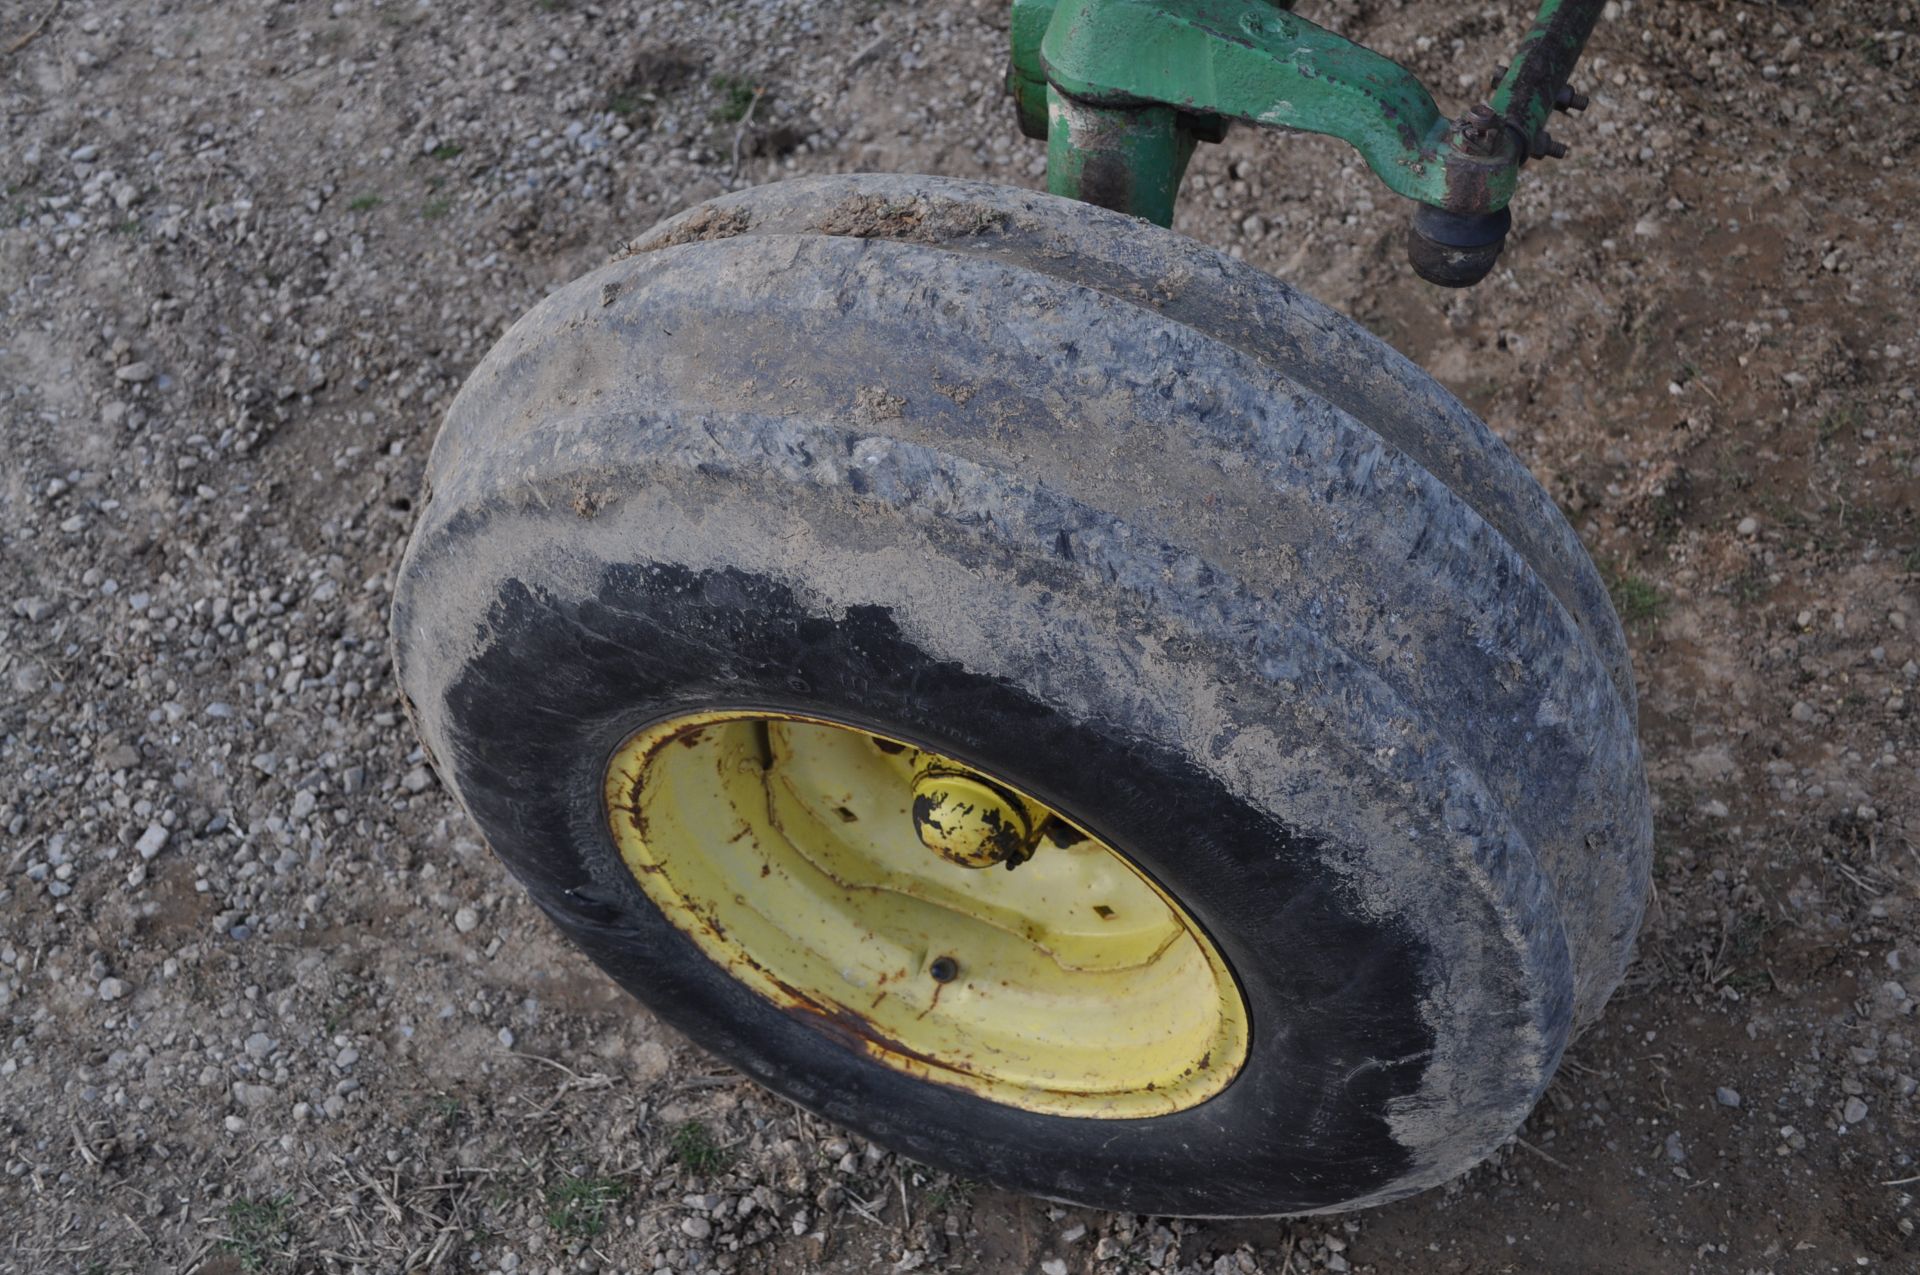 John Deere 4240 tractor, Cab, 18.4-34 tires, 11L-15 front, front weights, quad range, 2 hyd remotes - Image 5 of 26